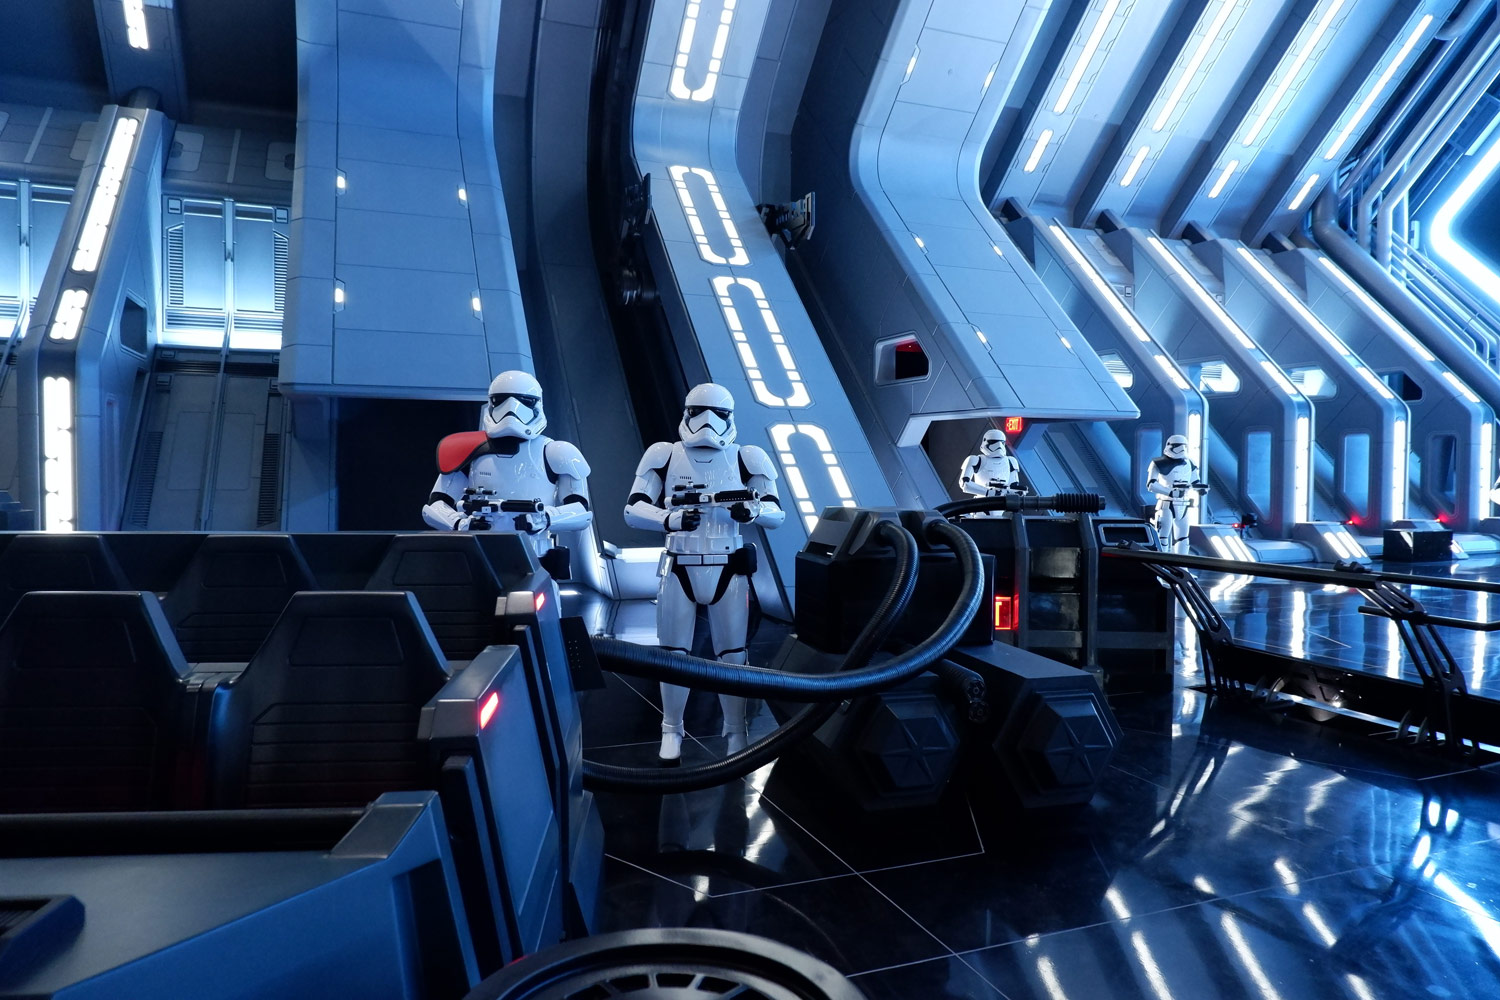 Stormtroopers greet the recruits at Star Wars: Rise of the Resistance